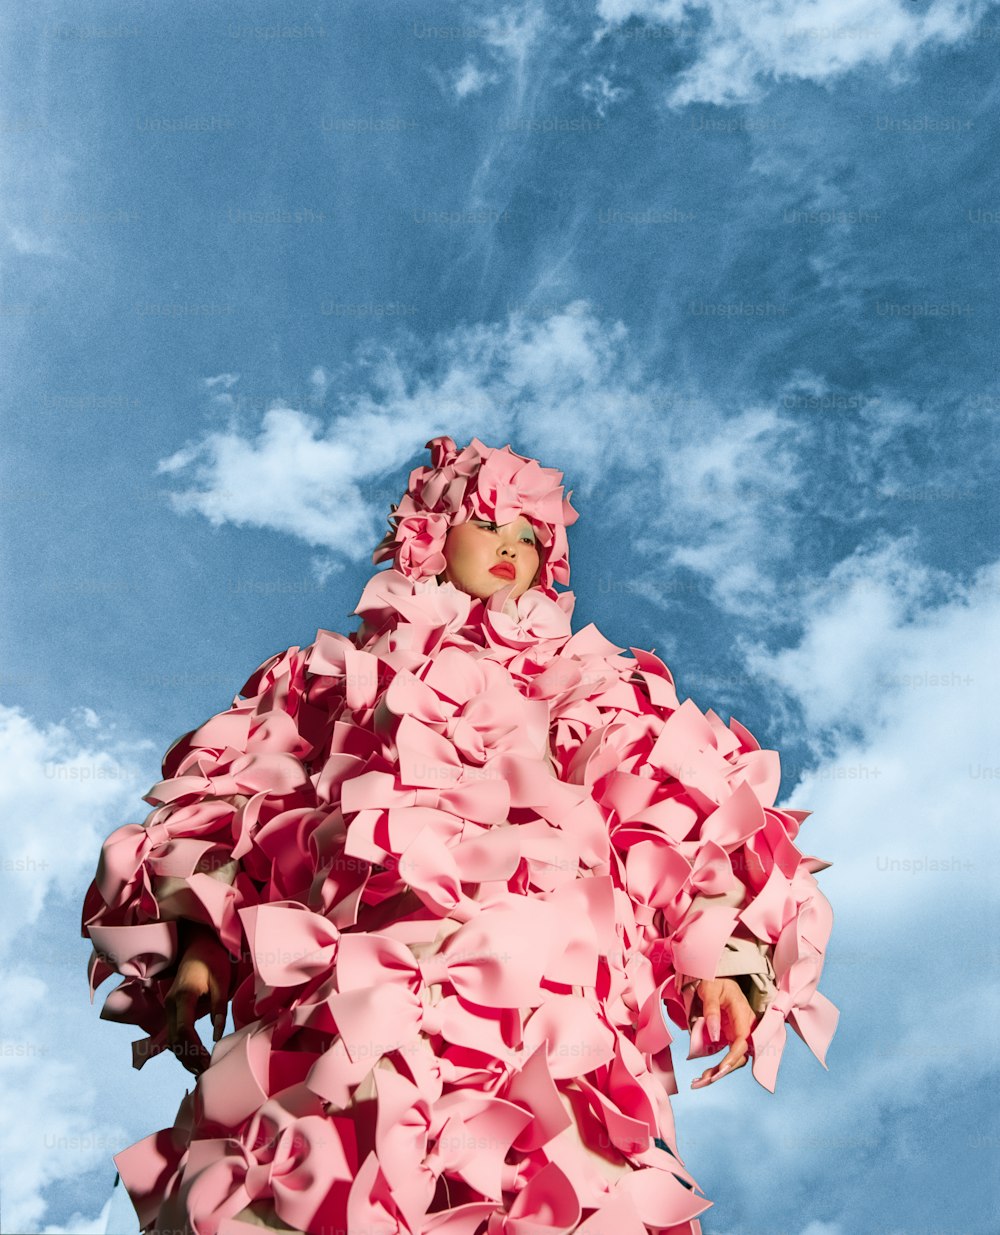 a woman in a dress made of pink paper